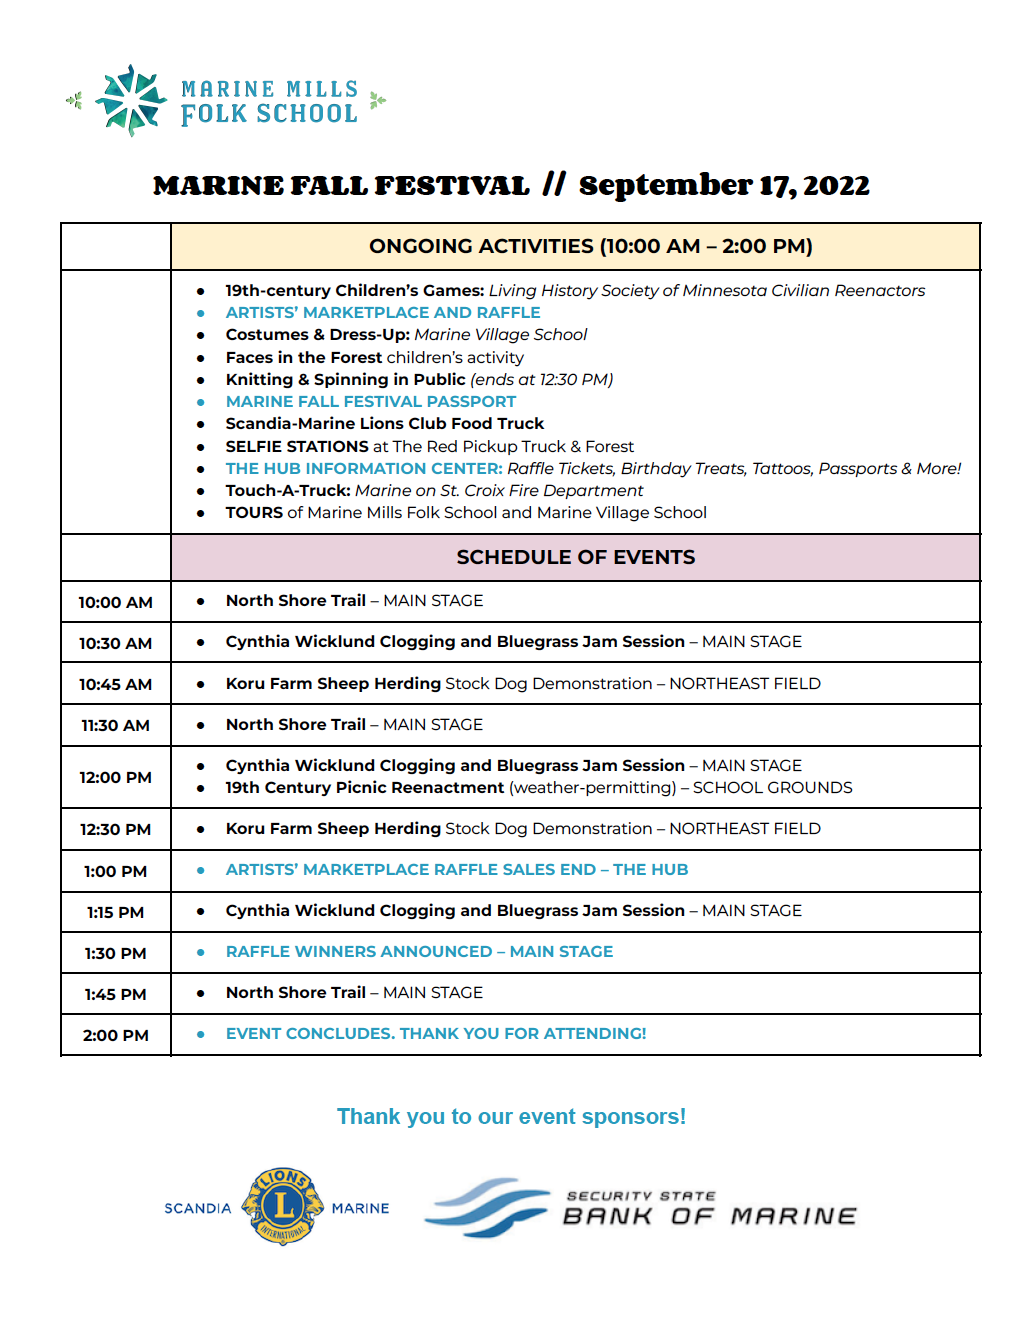 VIsual layout of Marine Fall Festival 2022 schedule of events